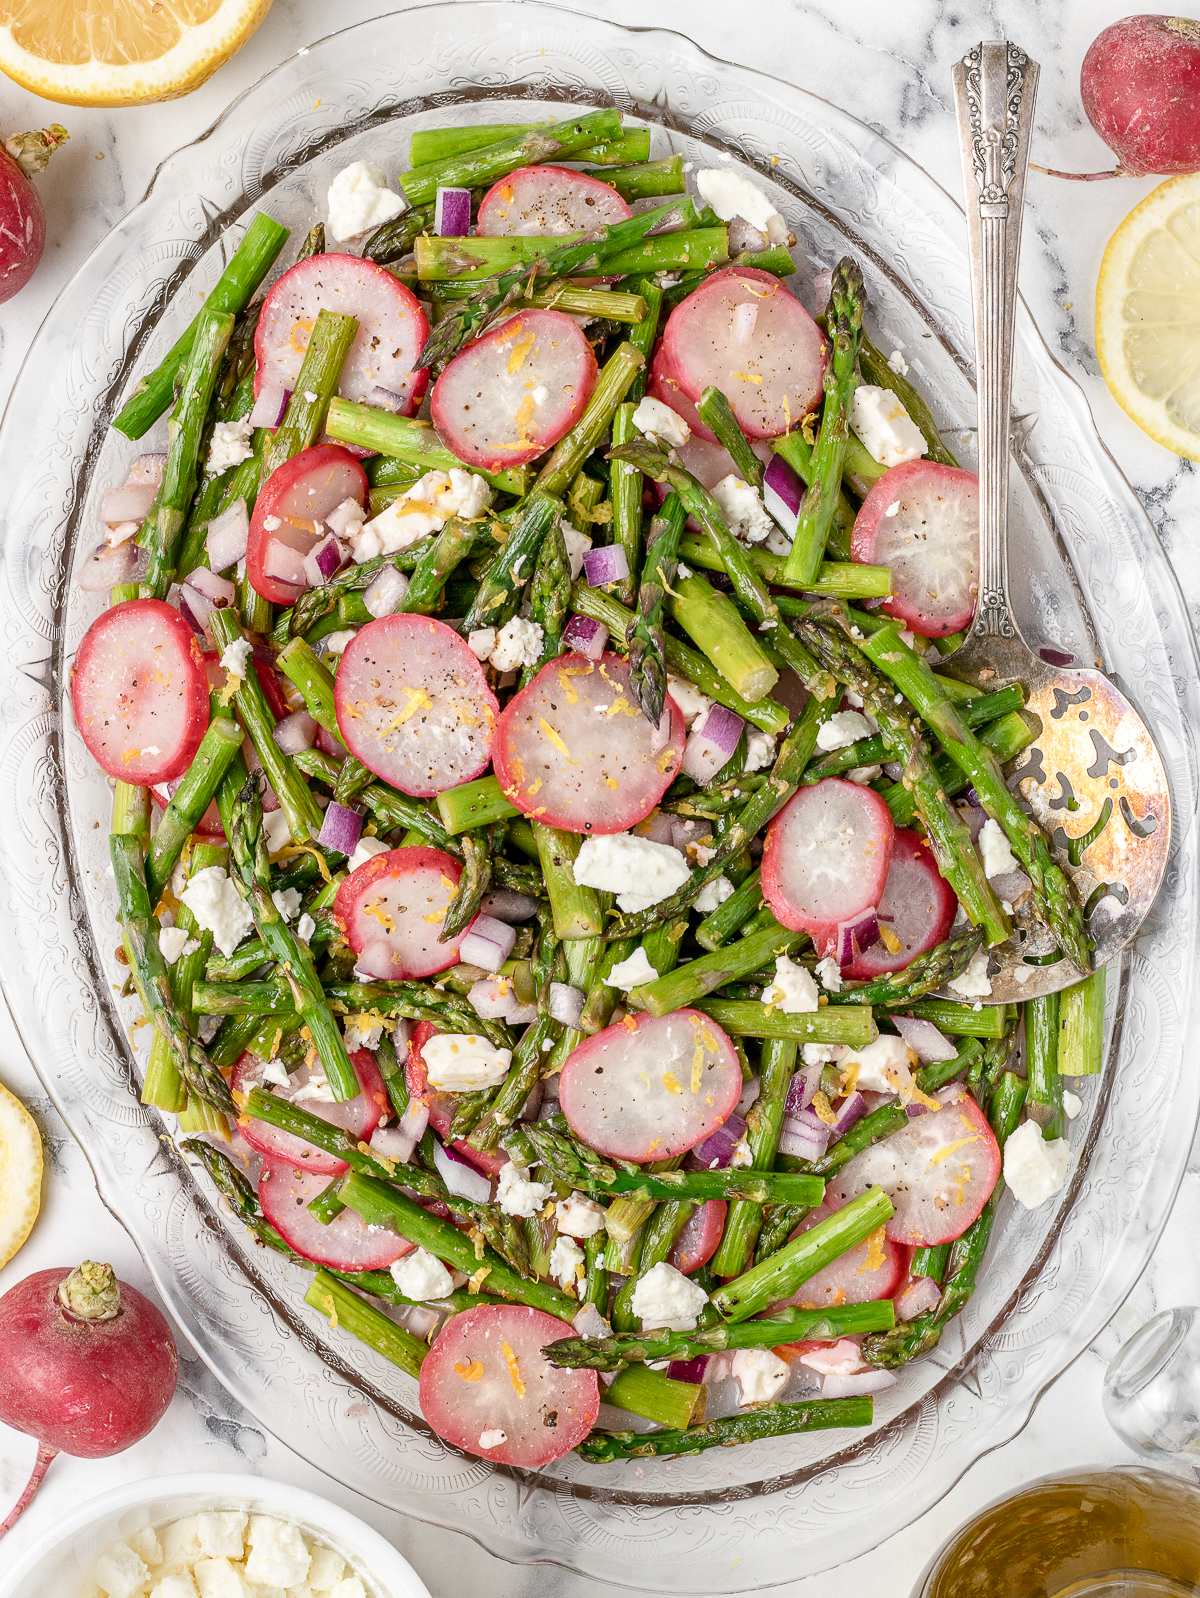 Platter filled with roasted asparagus, radishes, red onion, and feta cheese tossed in lemon juice and lemon zest.